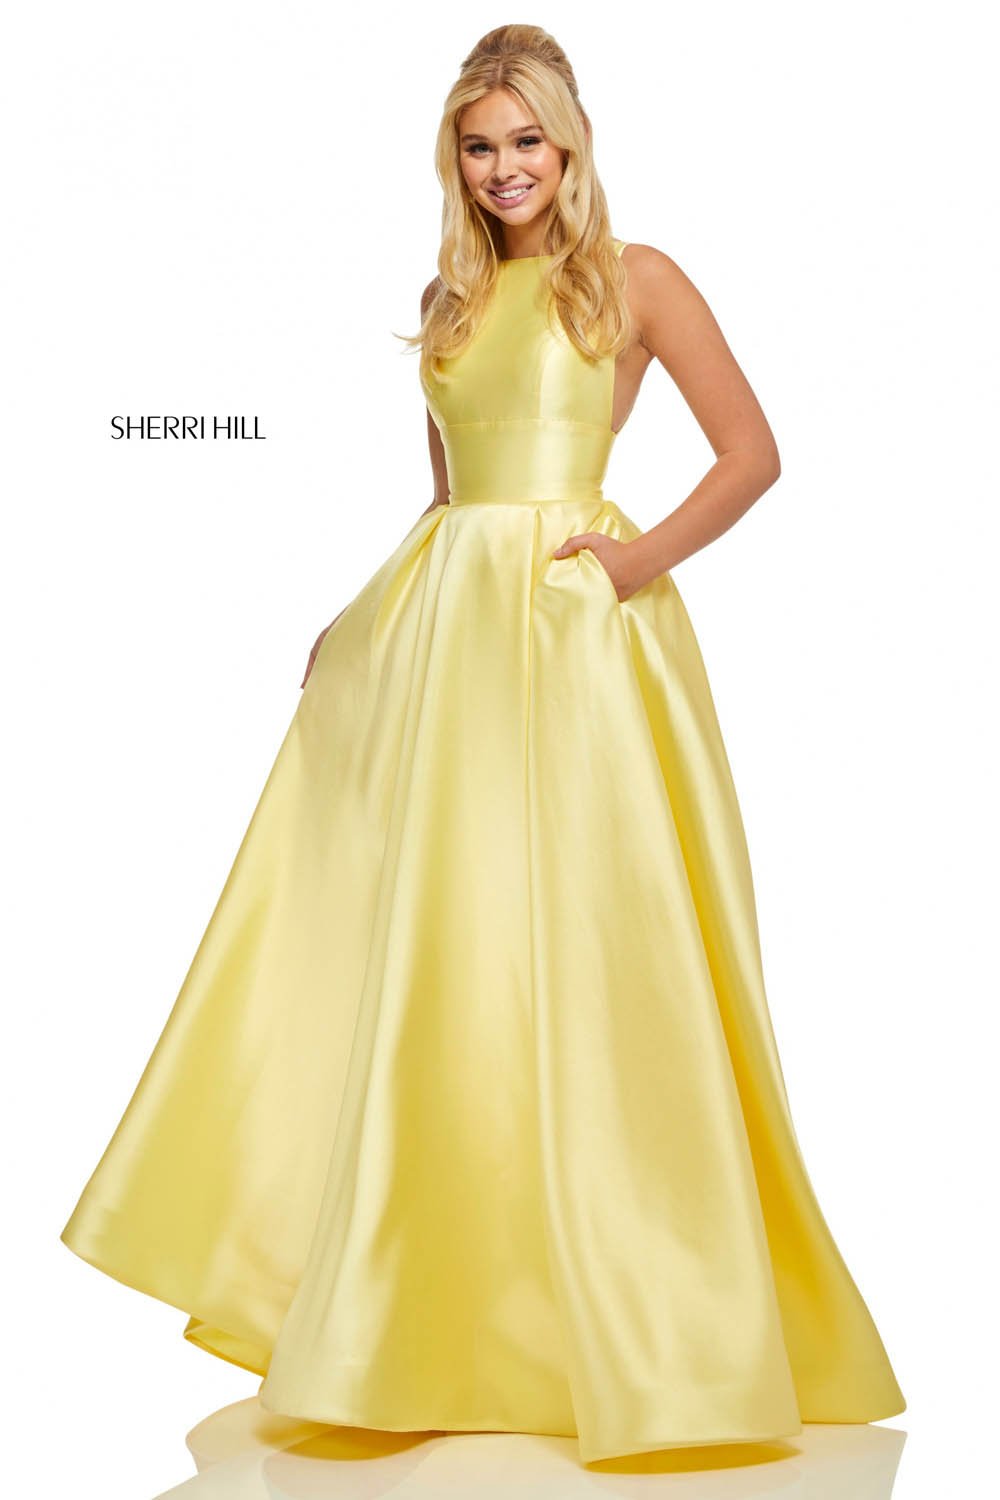 Sherri Hill 52572 dress images in these colors: Yellow, Light Blue, Mocha, Black, Red, Turquoise, Emerald.